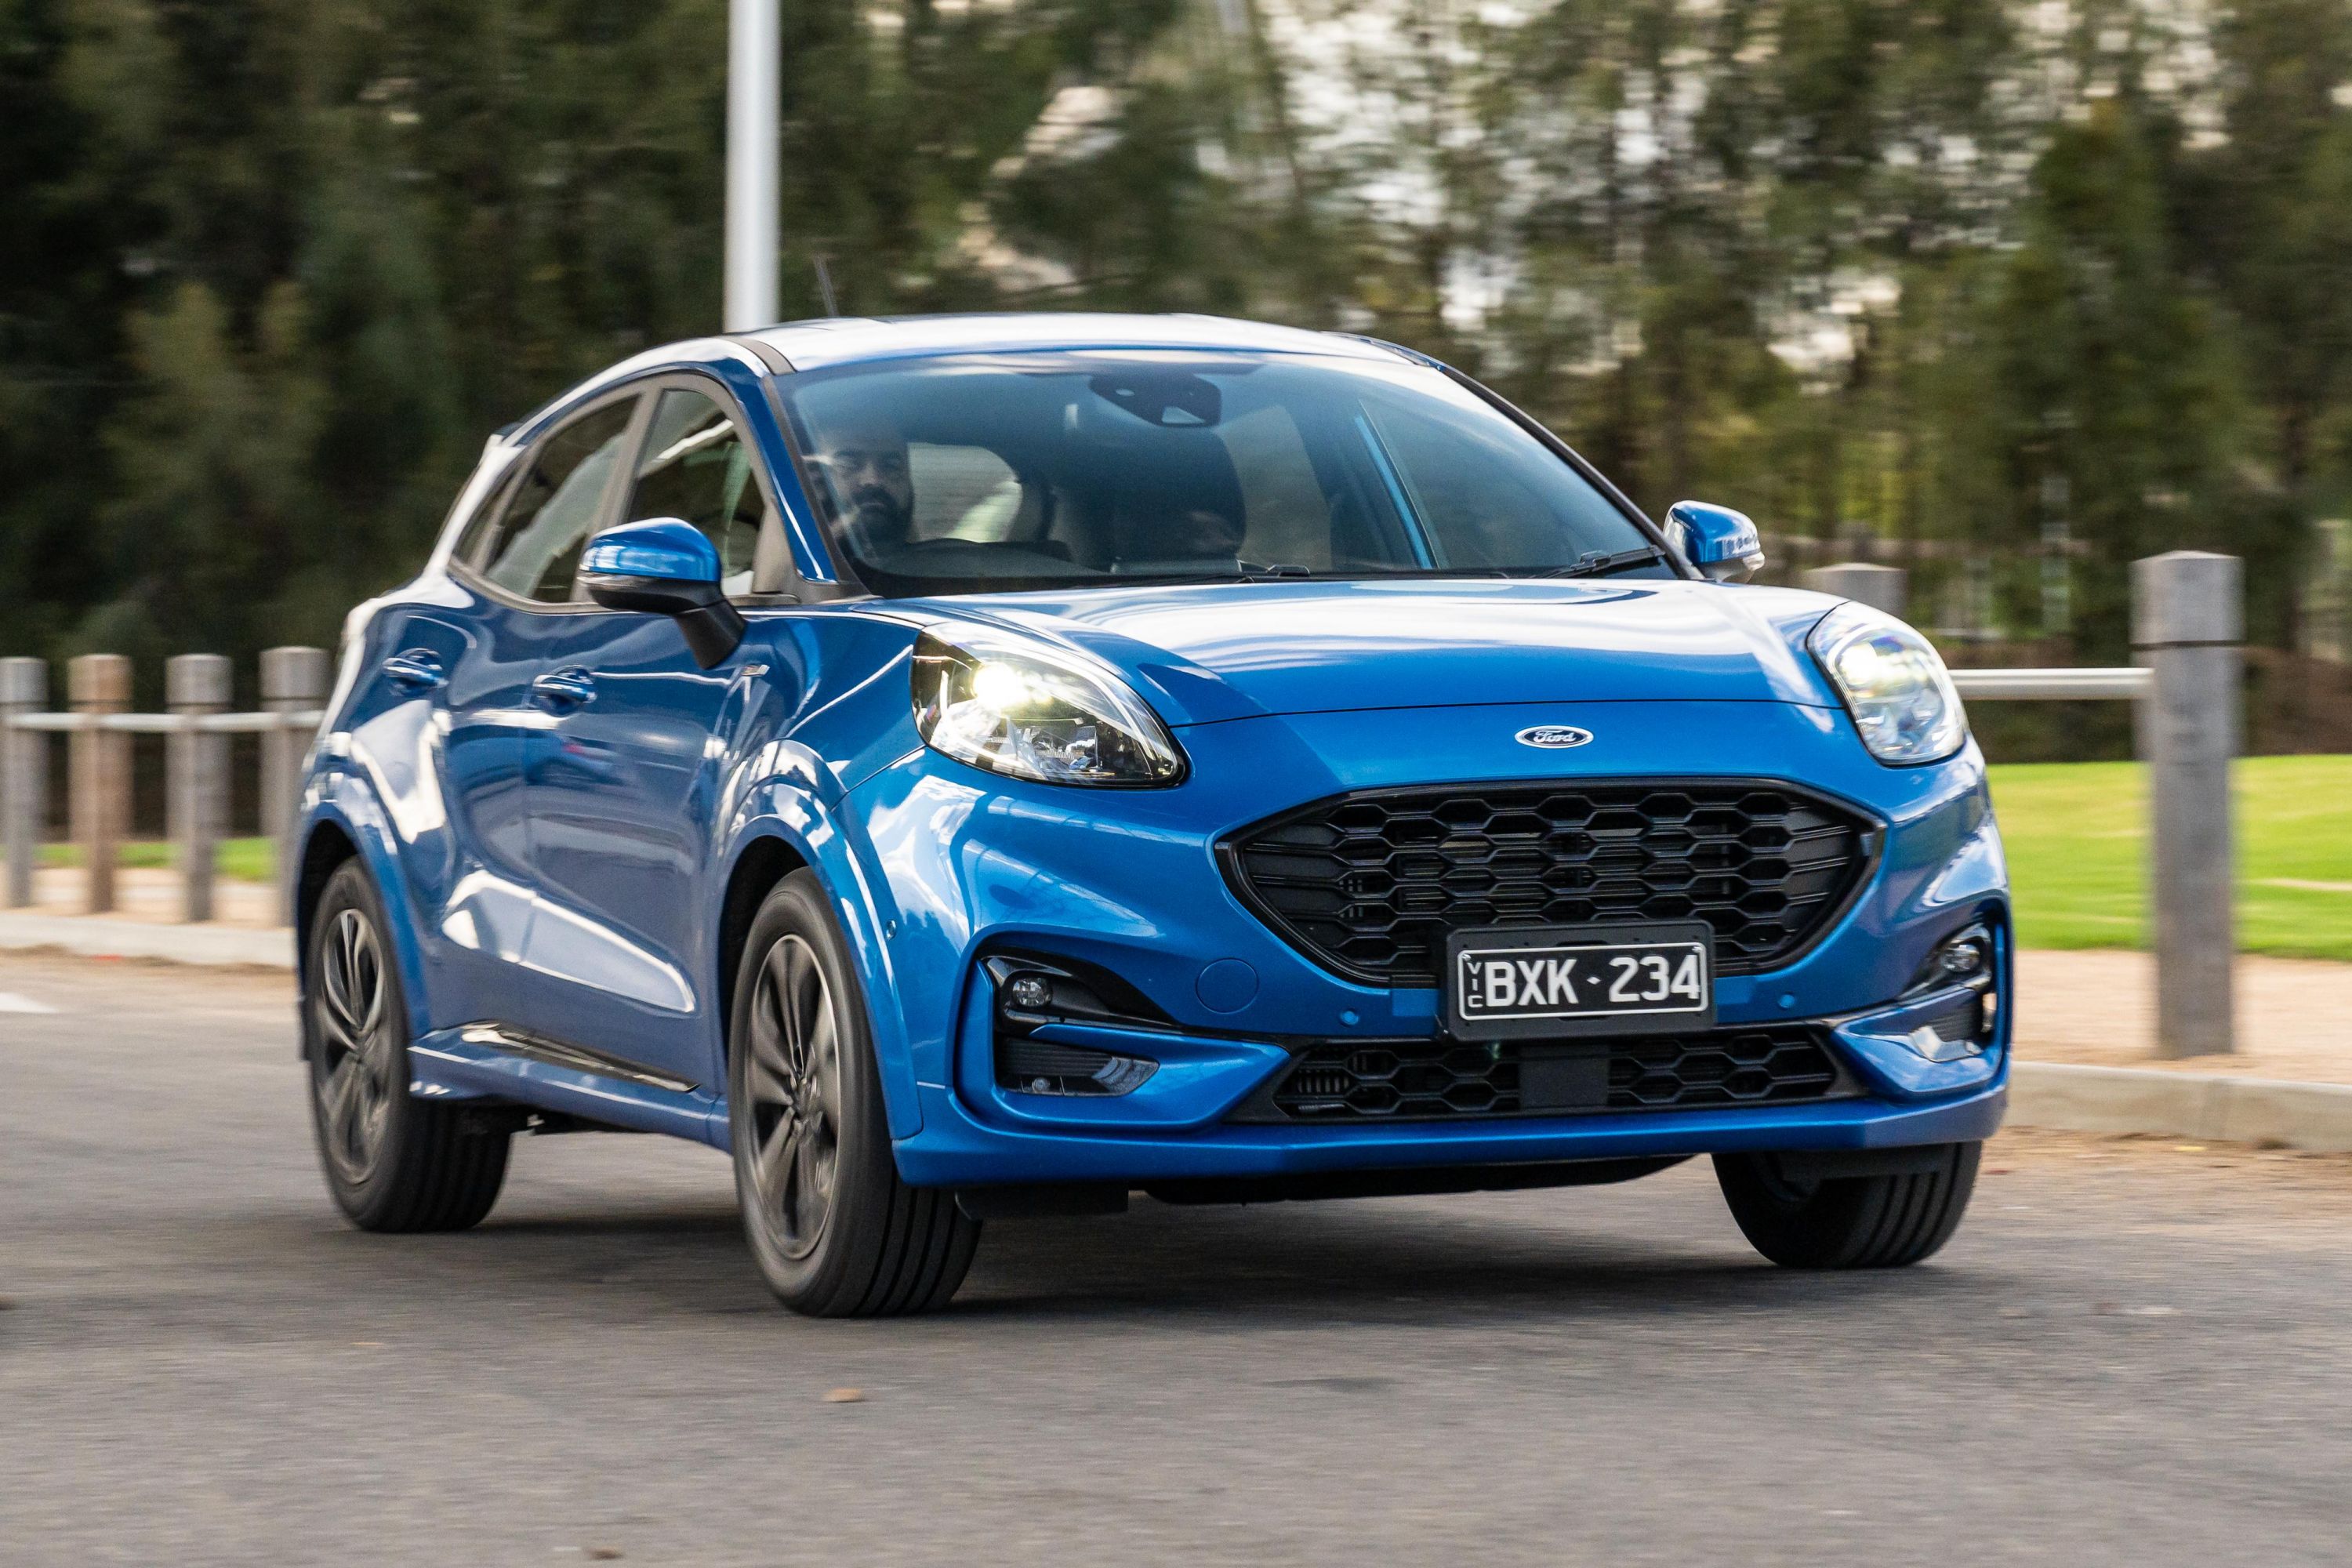 ellaslist Review: Hitting The Road In The All New Ford Puma